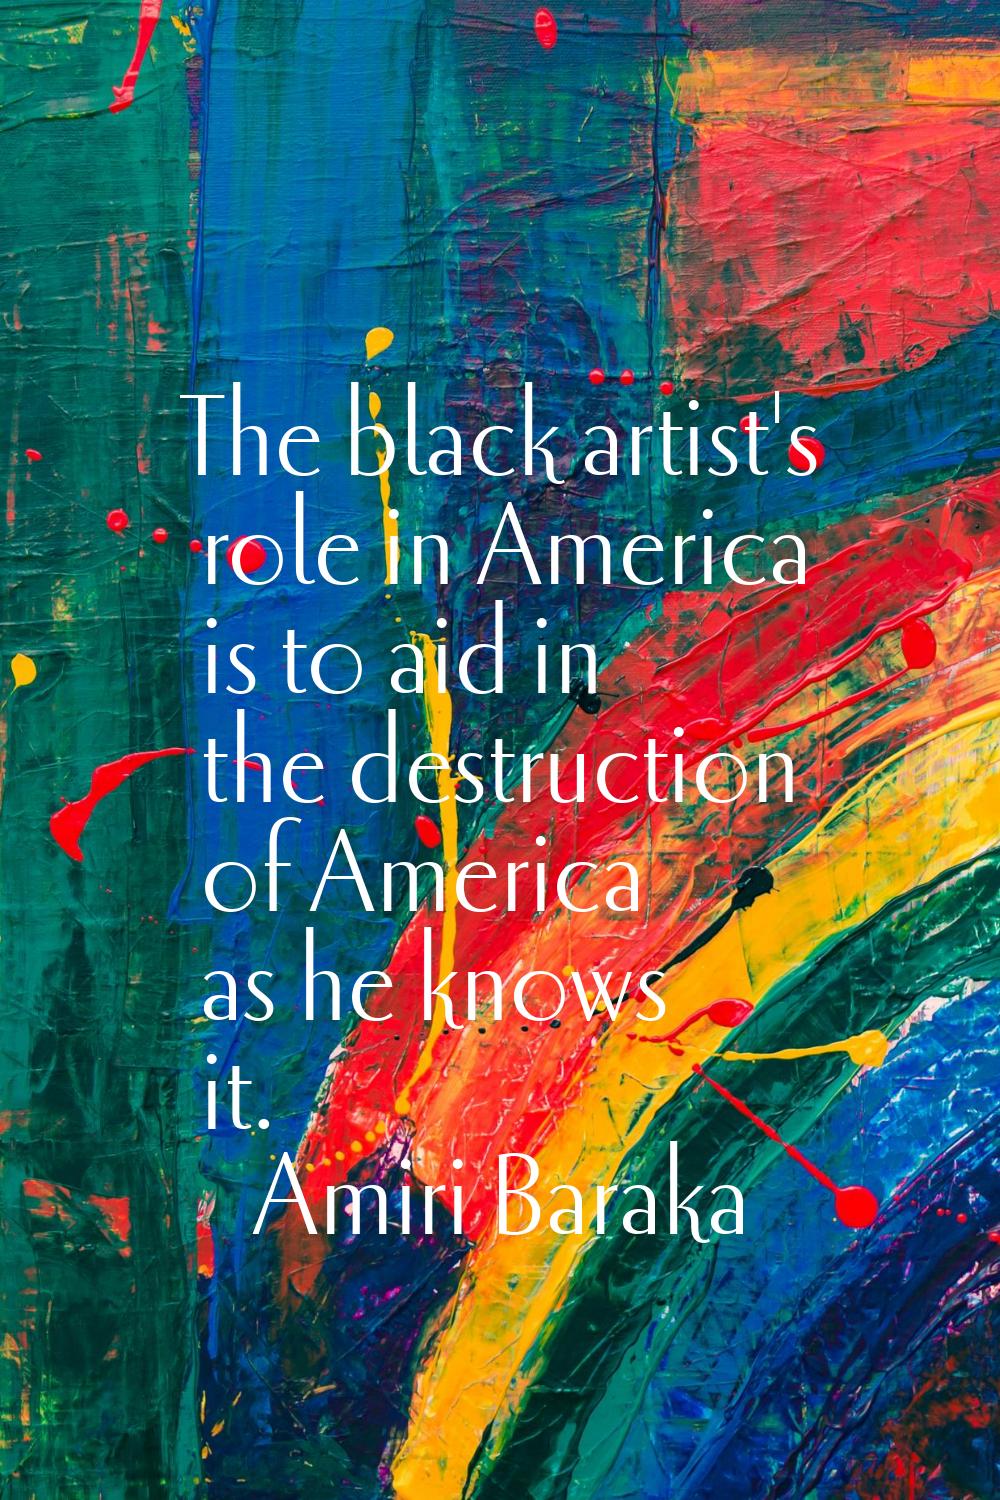 The black artist's role in America is to aid in the destruction of America as he knows it.